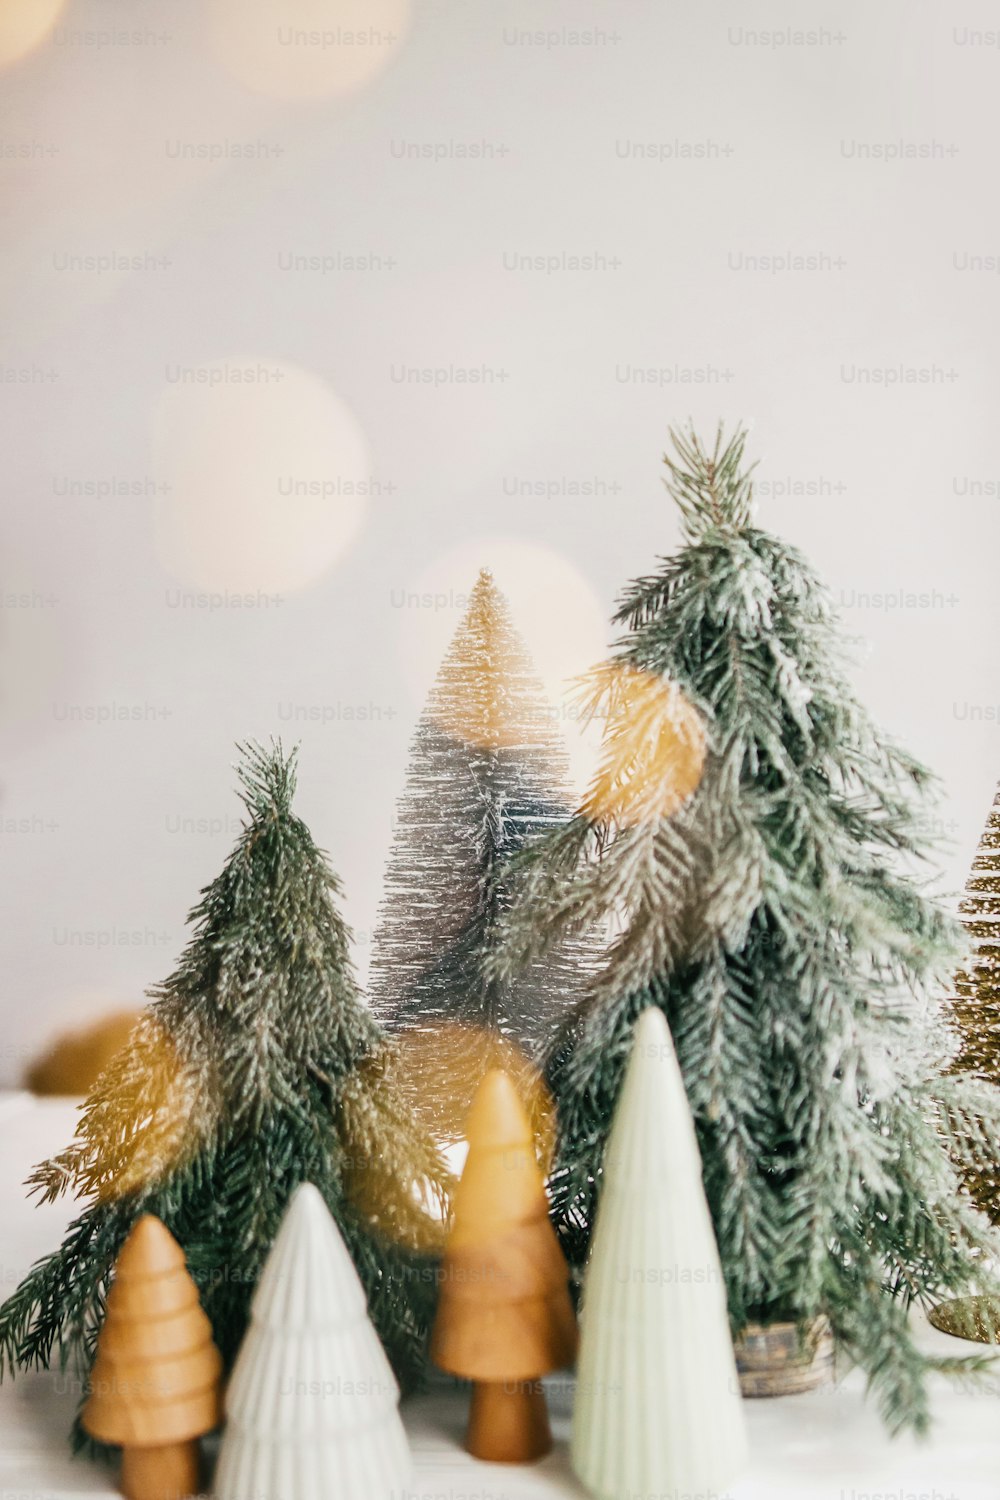 Christmas scene, miniature winter forest in lights. Christmas little ceramic, wooden and snowy pine trees on white background with illumination. Festive modern decoration. Merry Christmas!